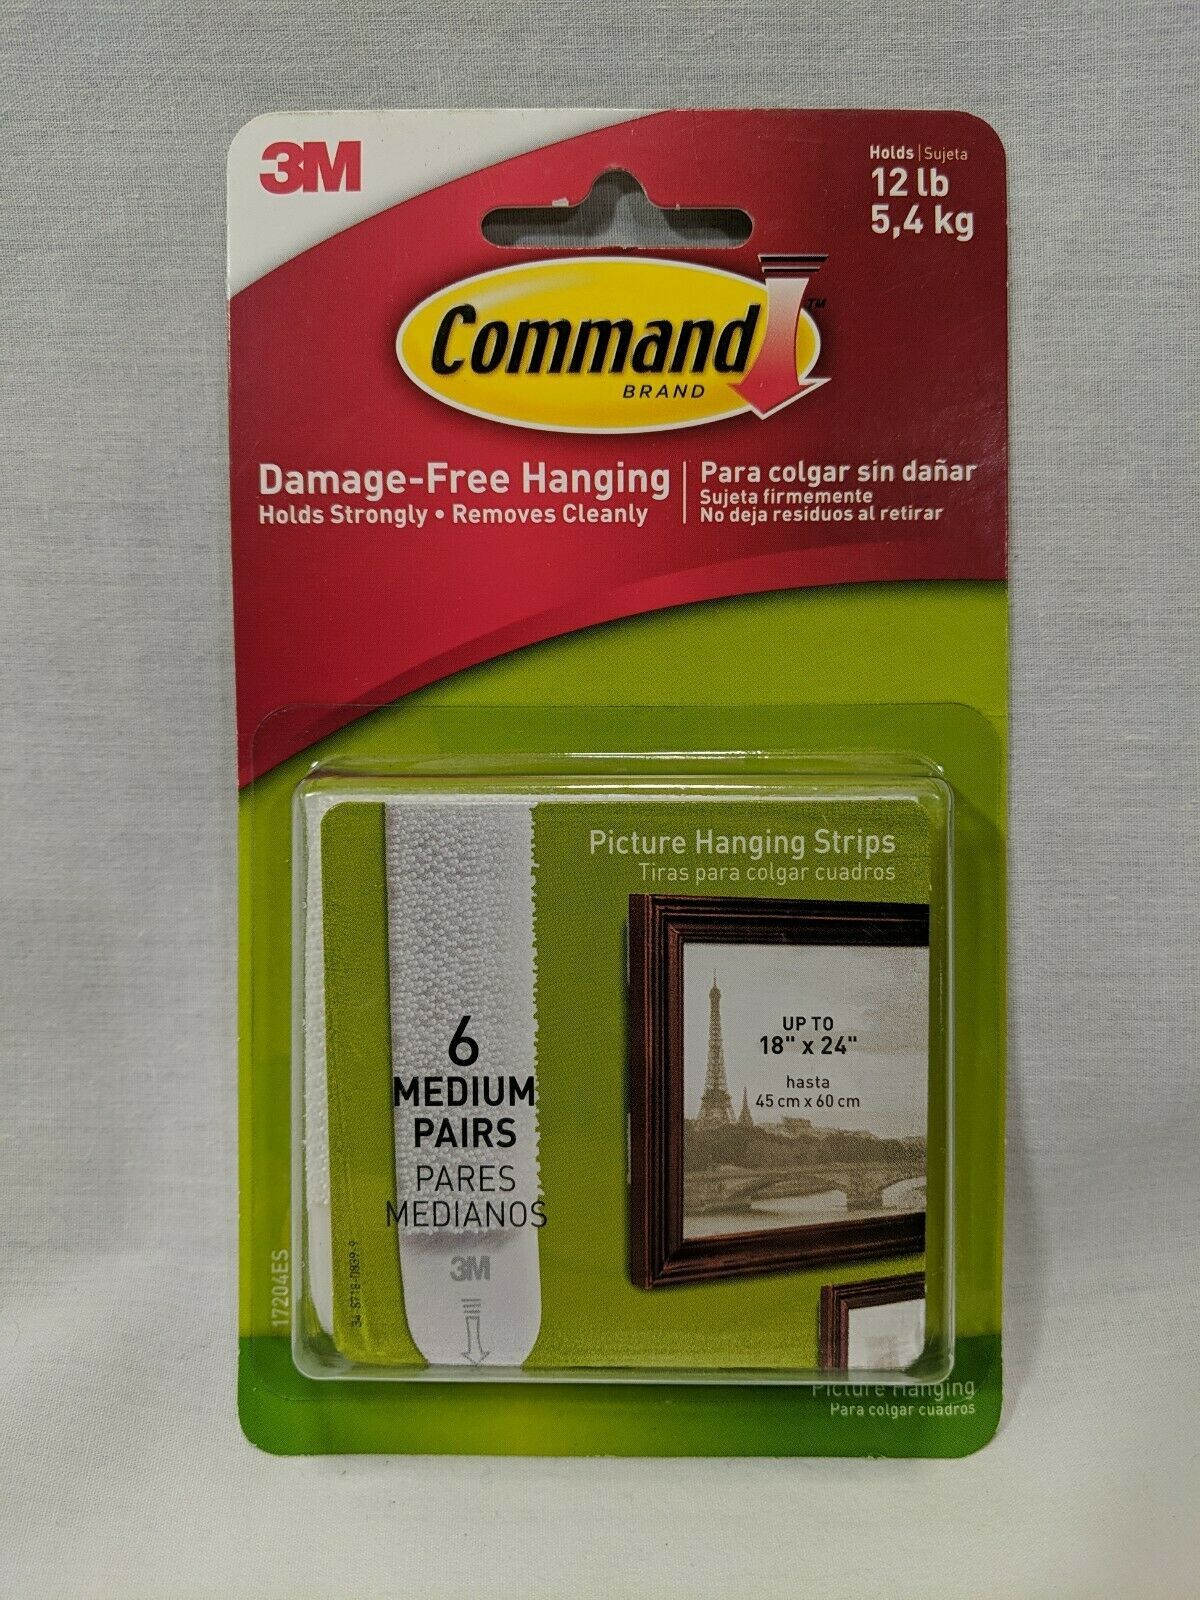 Primary image for 3M Command  12 lb. Foam Medium Picture Hanging Strips  6 pk